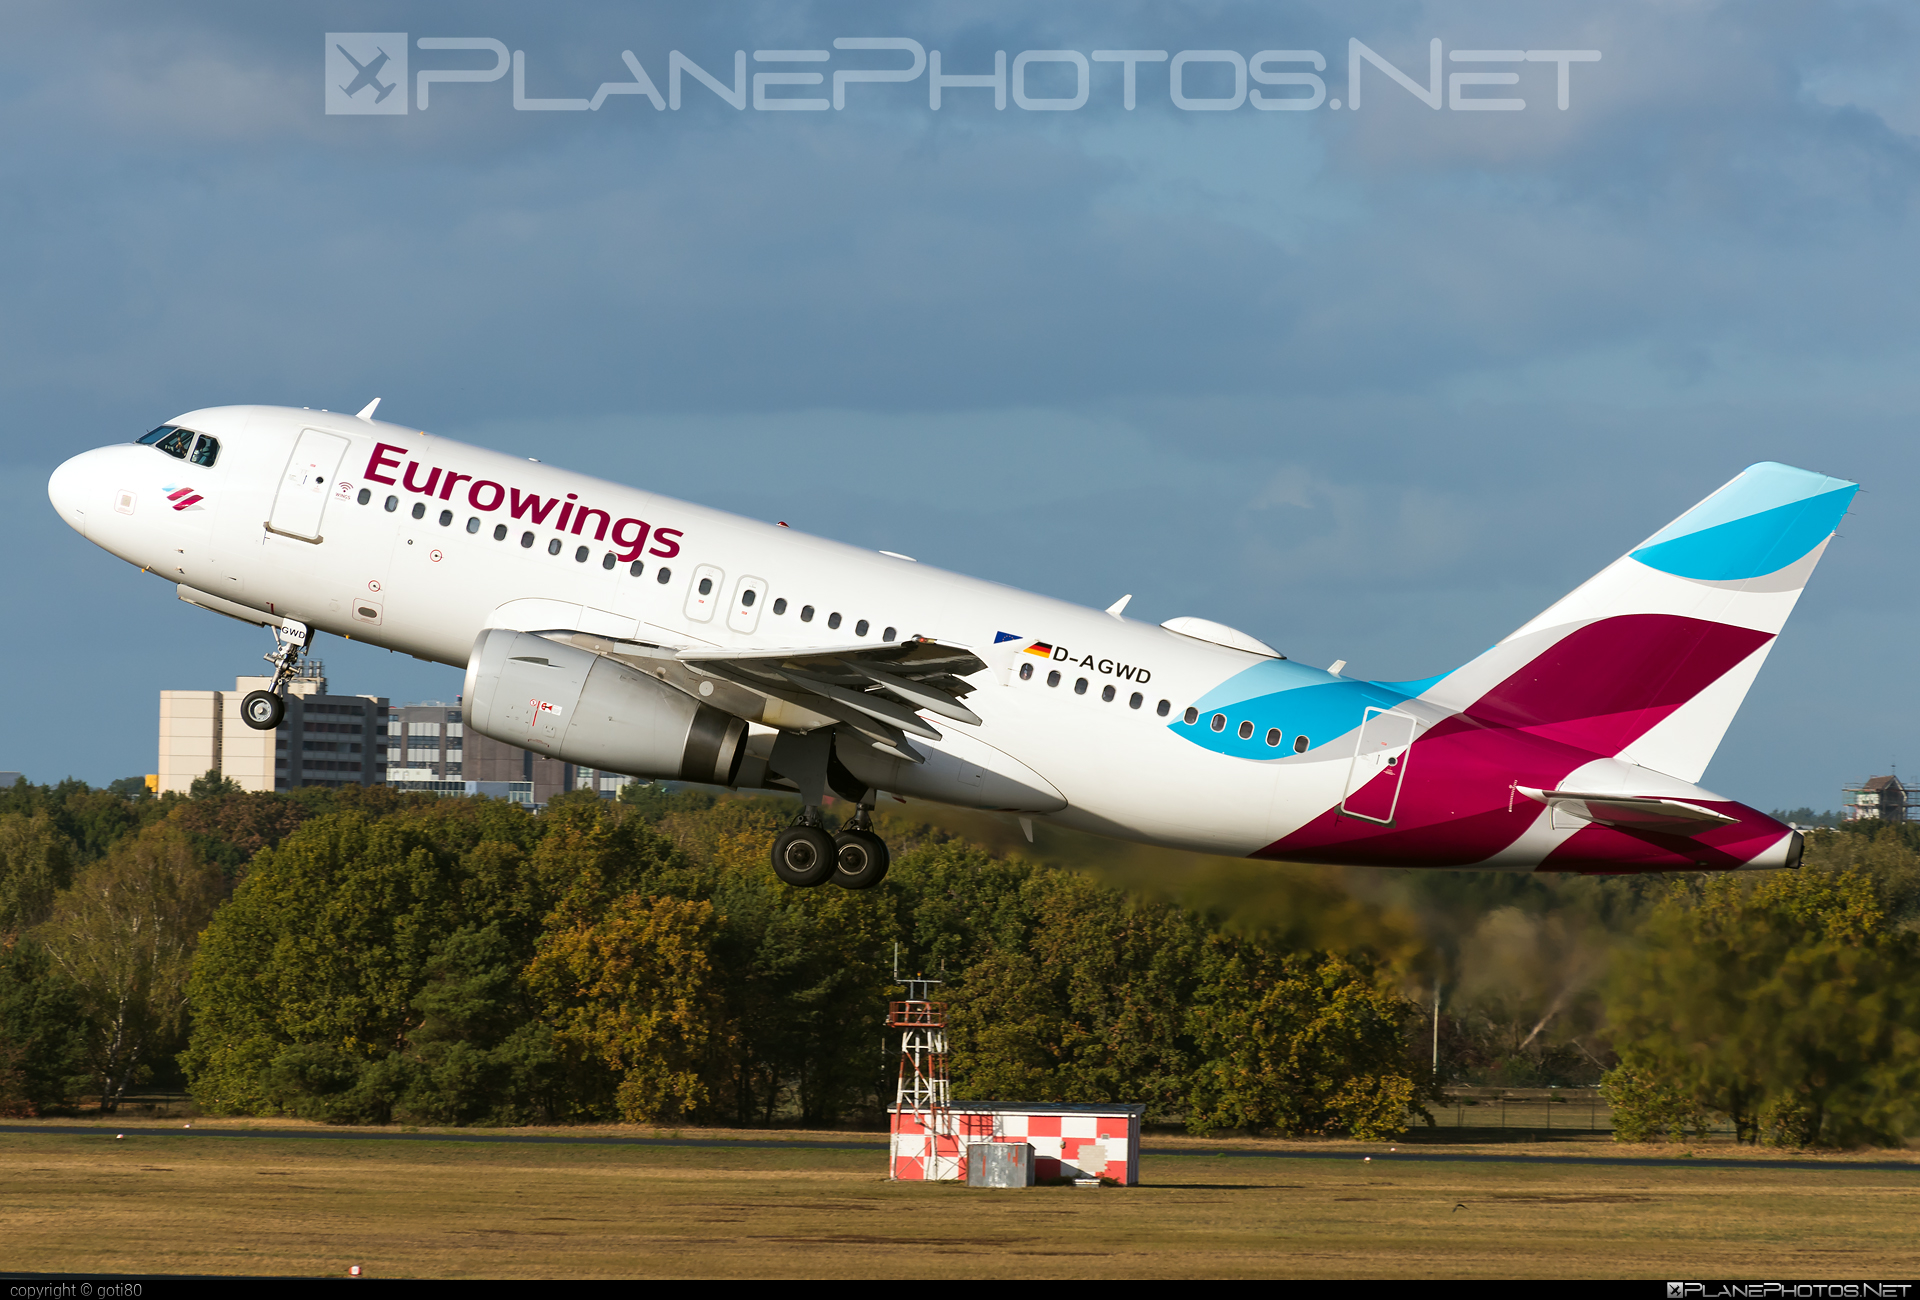 Airbus A319-132 - D-AGWD operated by Eurowings #a319 #a320family #airbus #airbus319 #eurowings